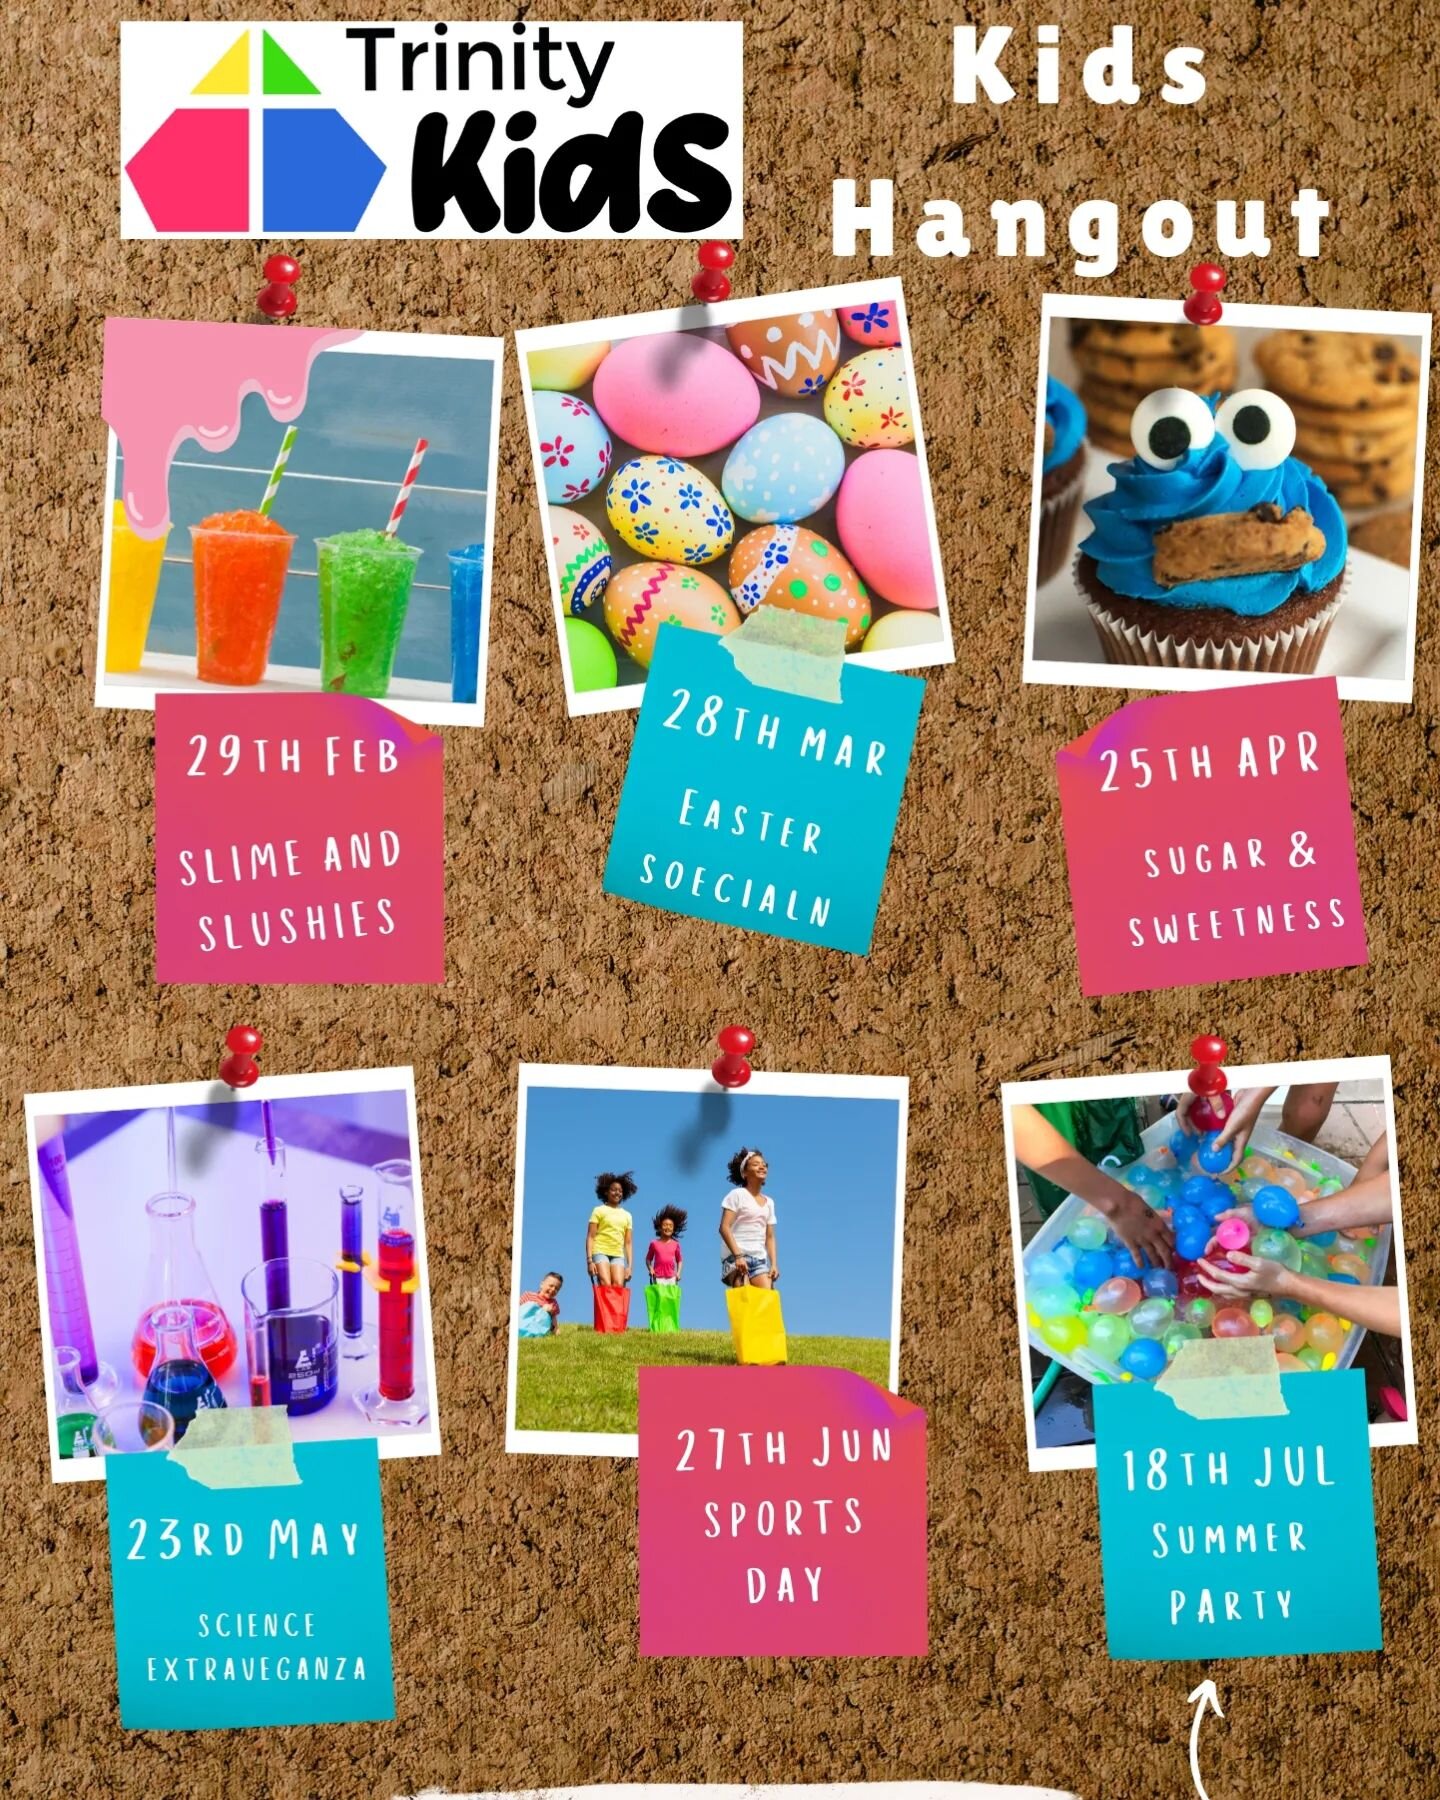 Kids Hangout is back this Thursday 6pm-7pm for kids in school years 4-6!! We're going ALL out with SLIME (yes slime) and SLUSHIES!!!! 🙈